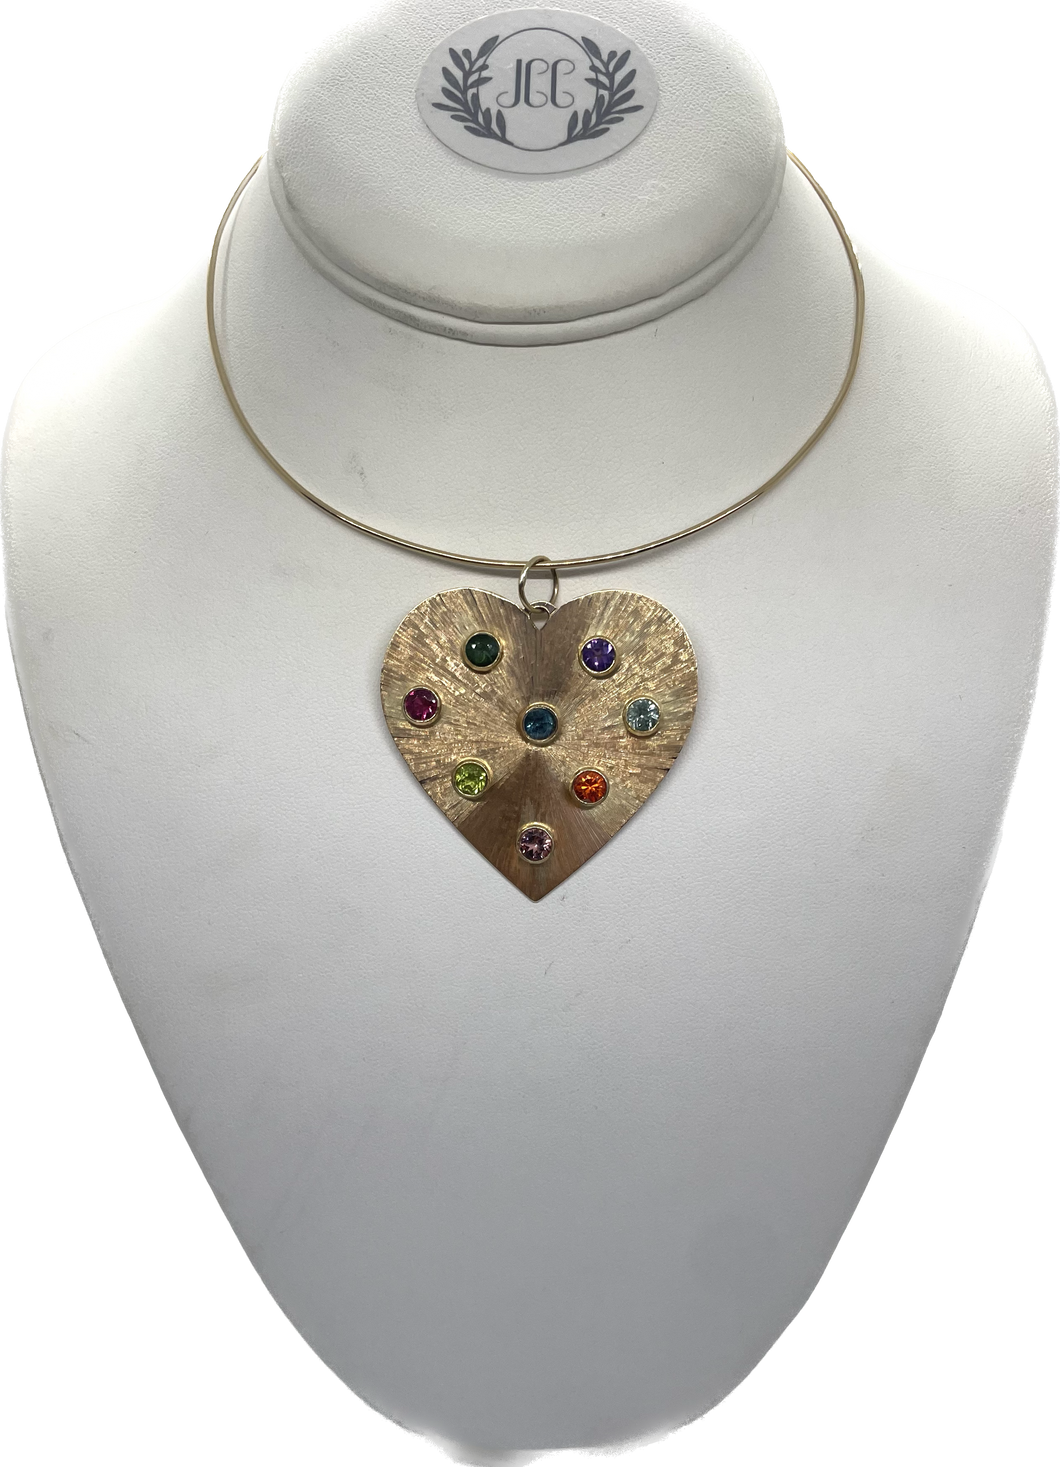 Etched Heart Pendant with Semi Precious Stones